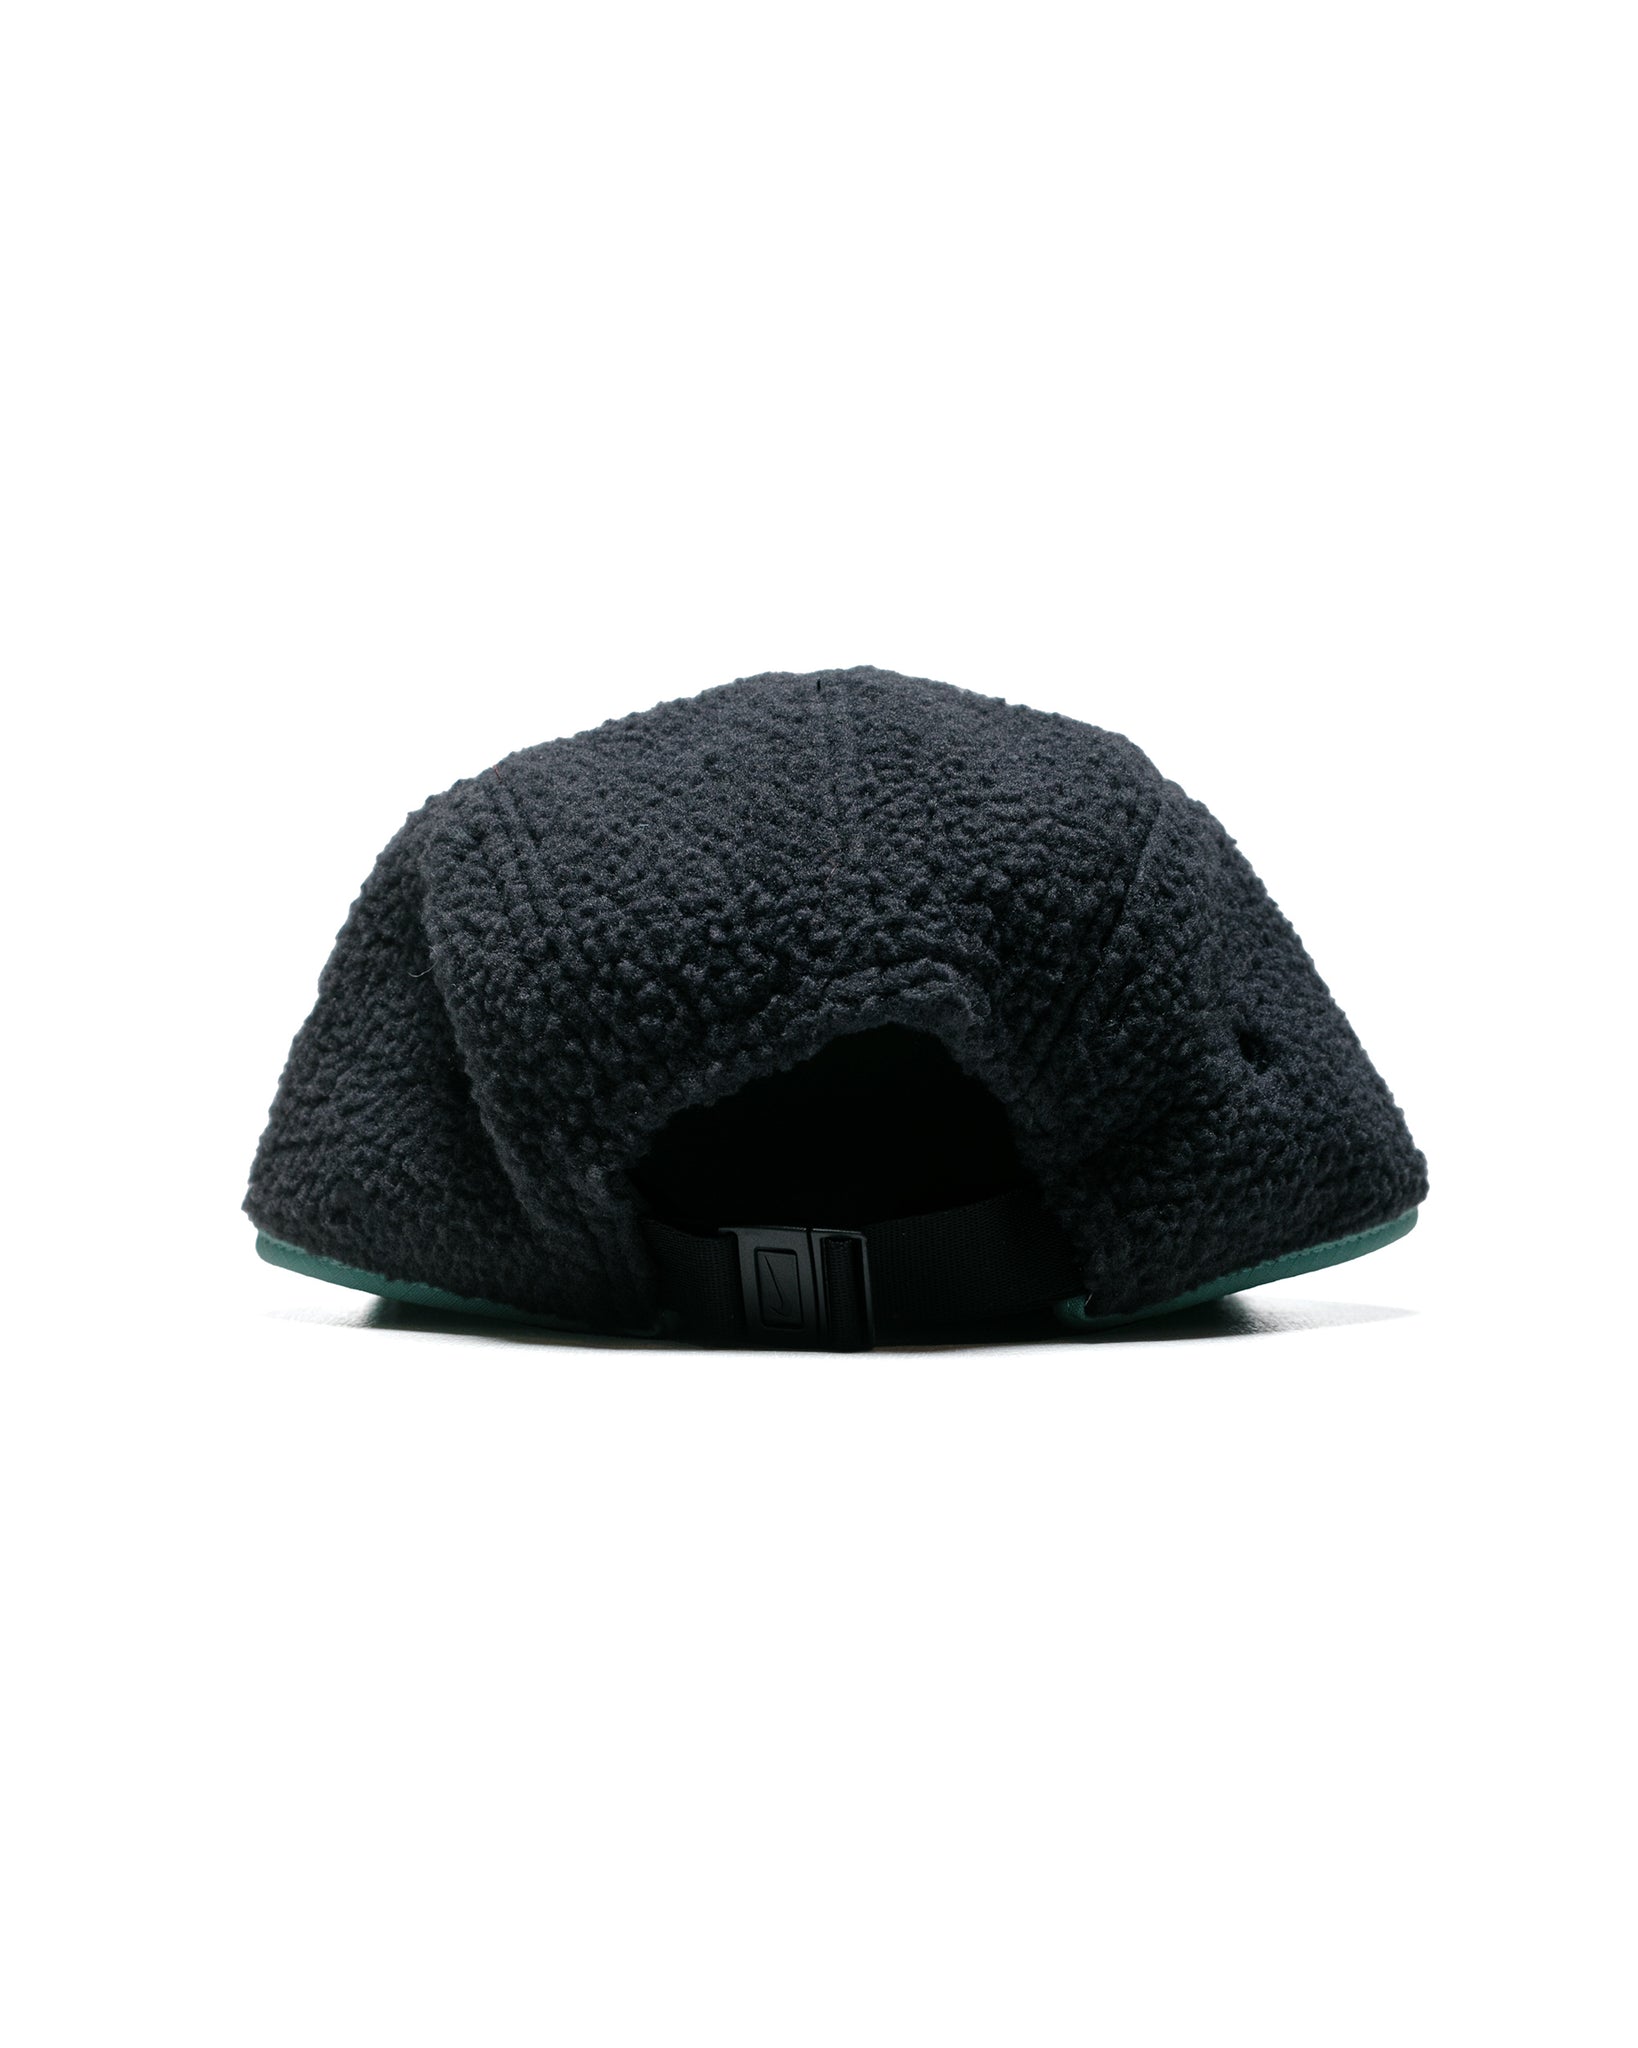 Nike ACG Therma-FIT Fly Unstructured Cap Black/Bicoastal back